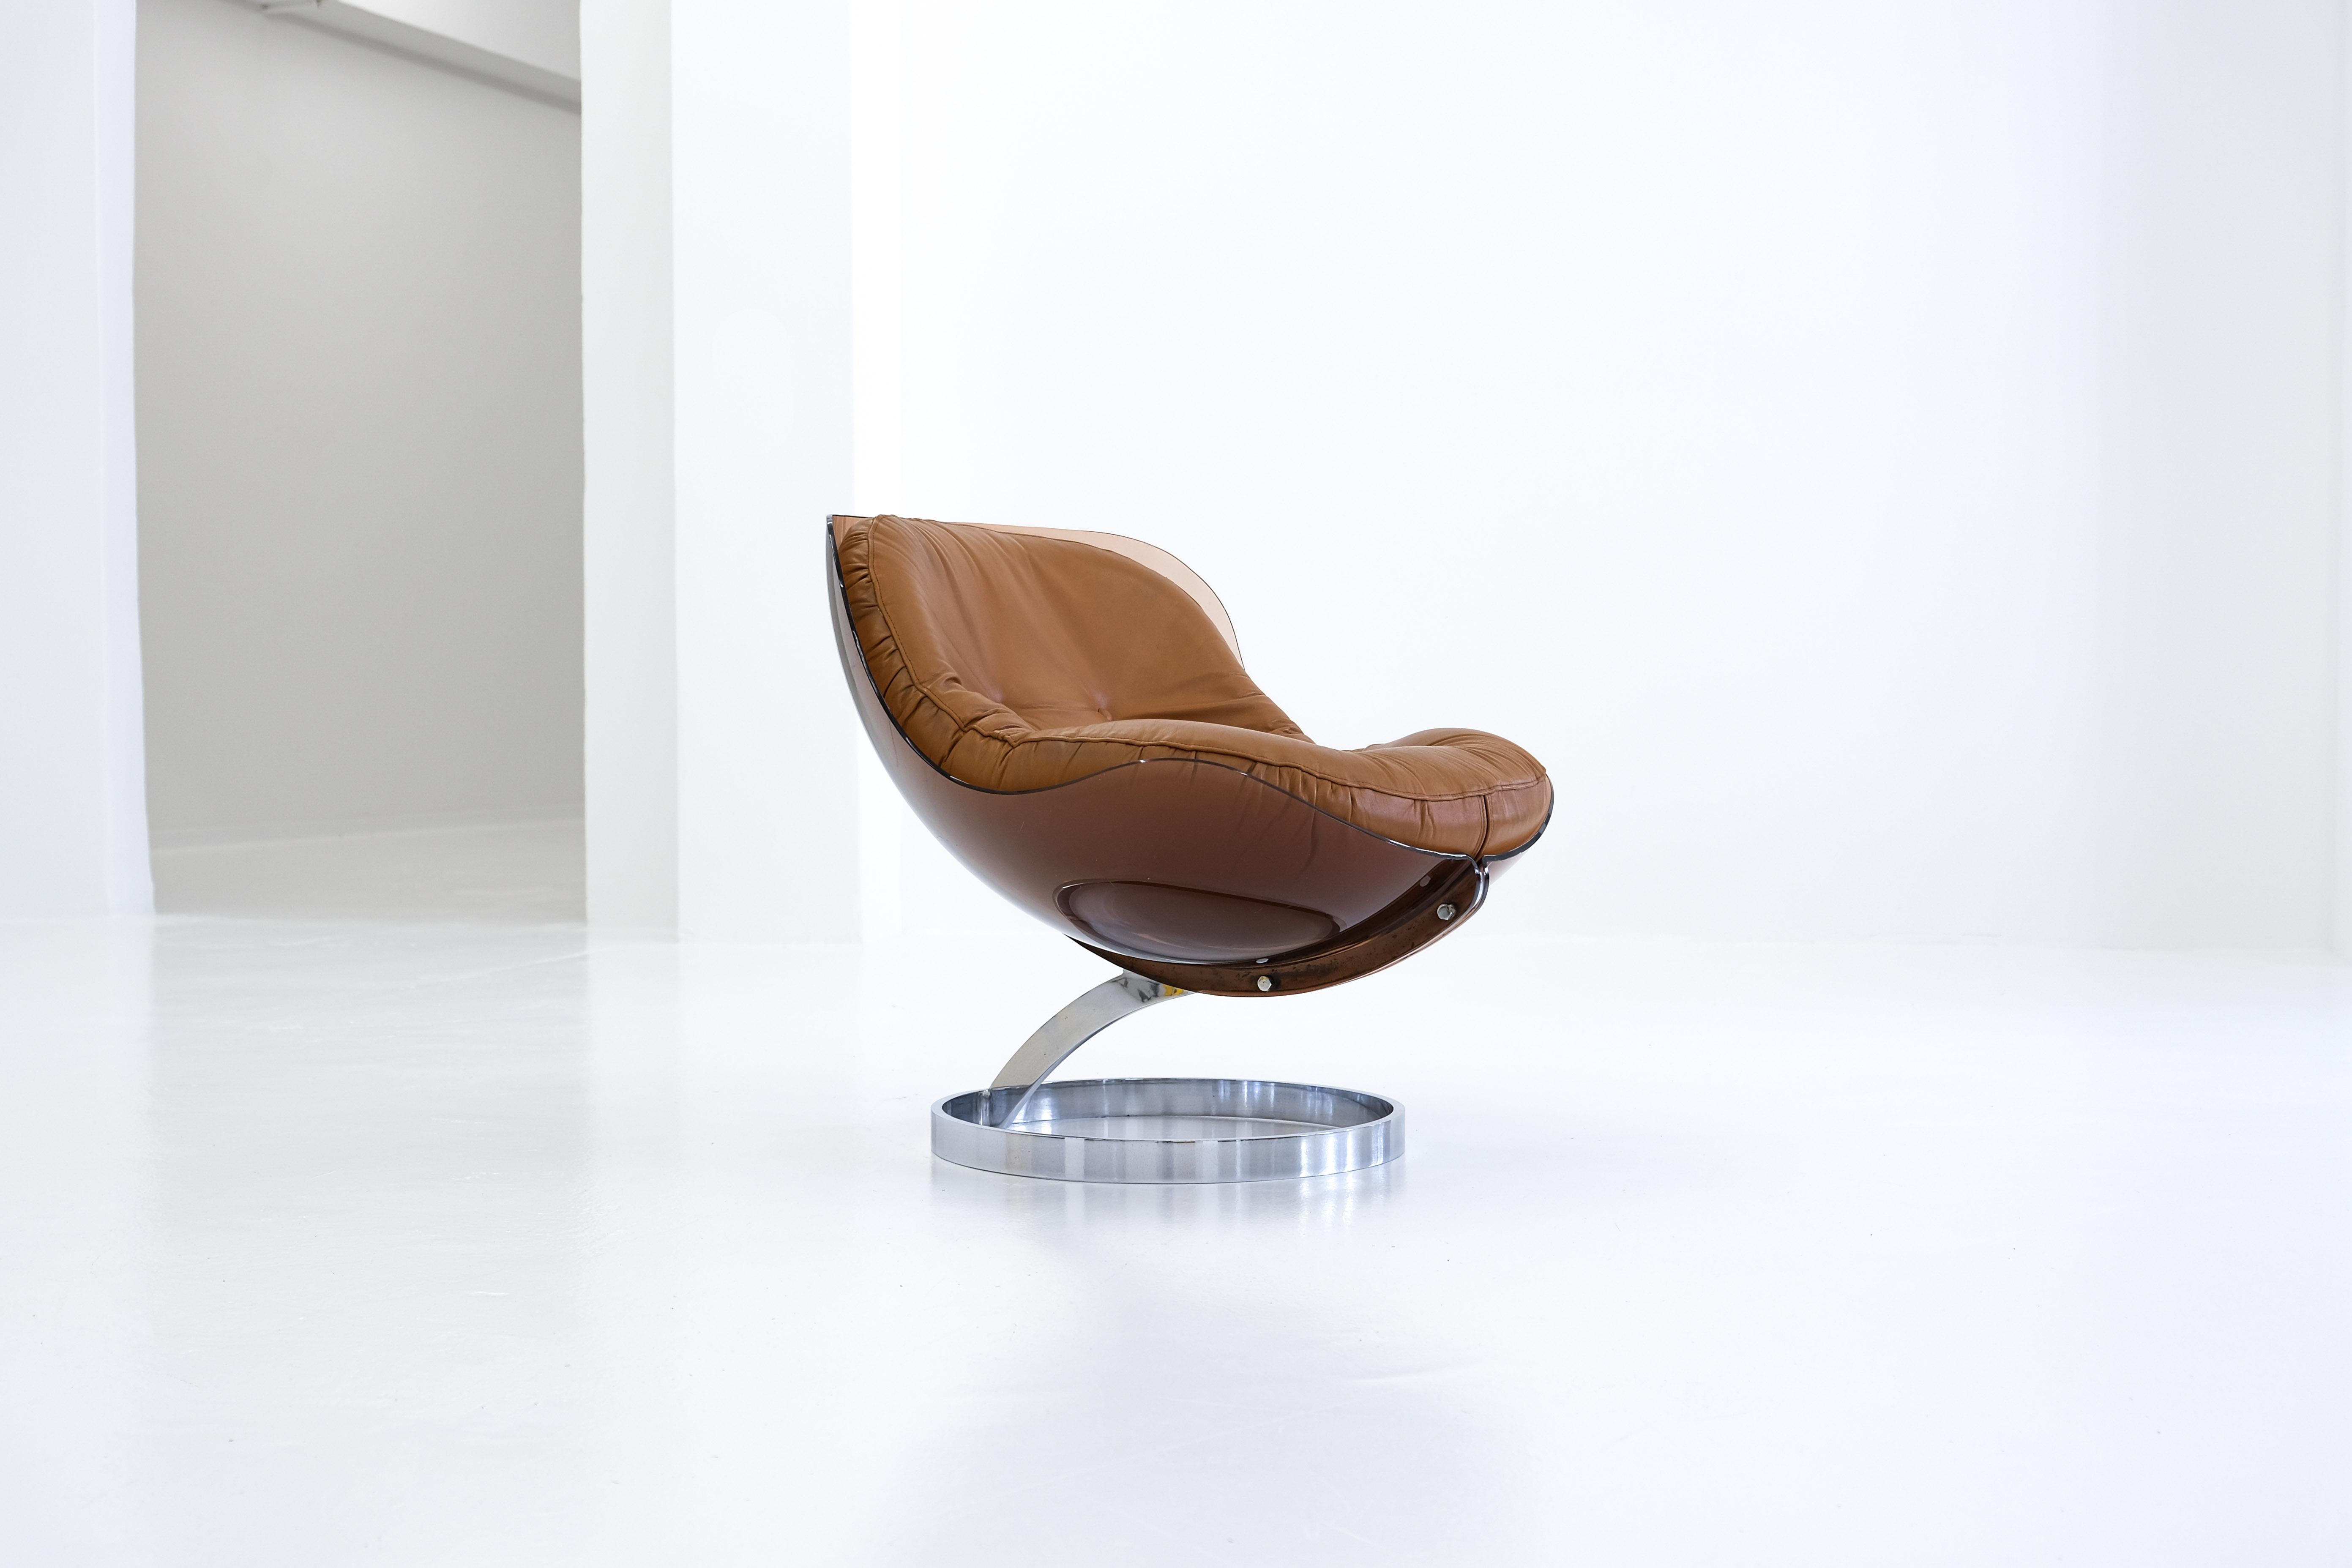 Steel Space Age Sphère Lounge Chair by Boris Tabacoff for Mobillier Modulaire Modern